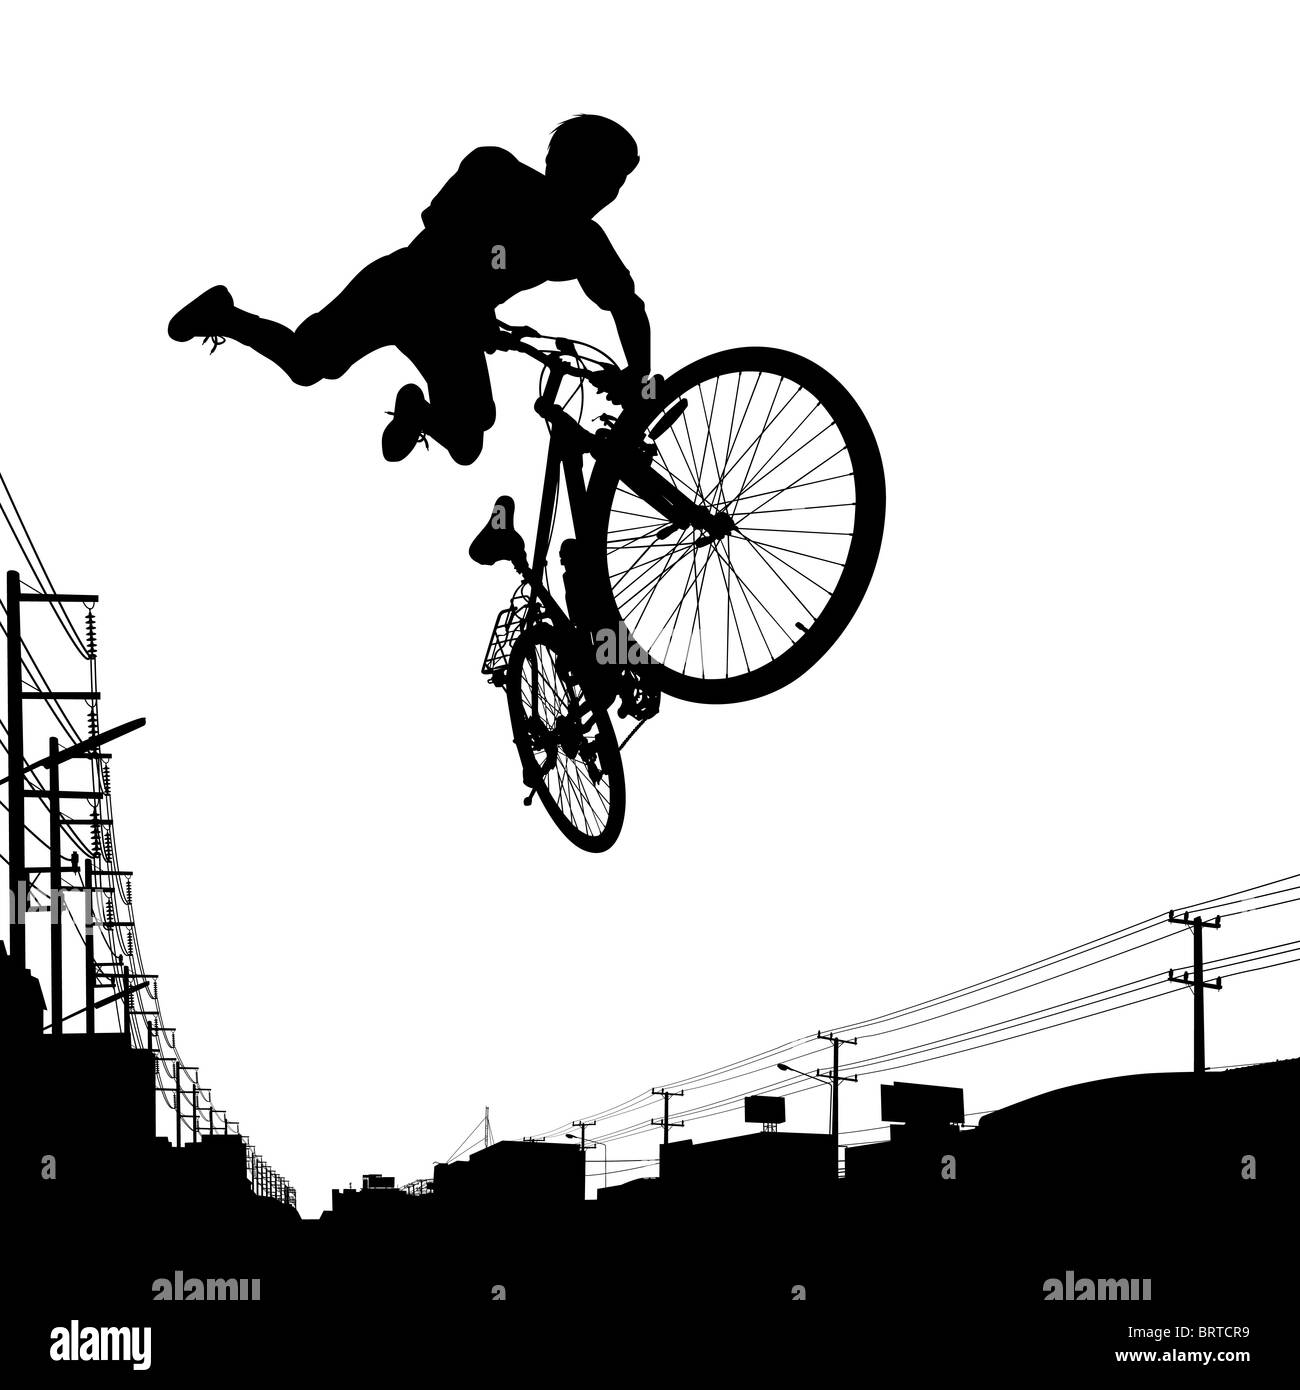 Illustration of a boy jumping with his bike Stock Photo